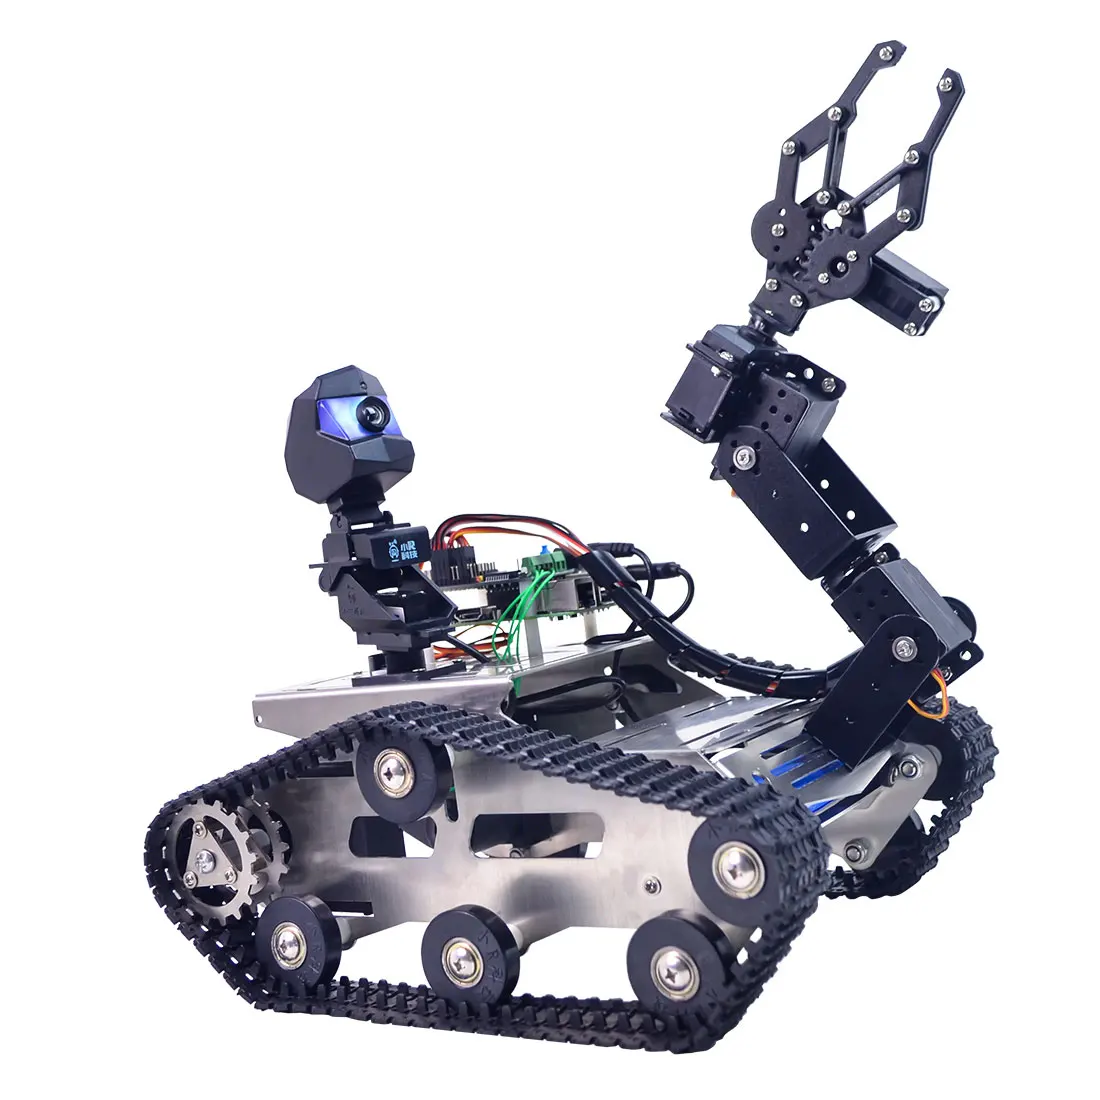 Programmable TH WiFi FPV Tank Robot Car Kit with Arm for Raspberry Pi4 (2G) - Line Patrol Obstacle Avoidance Version Small Claw